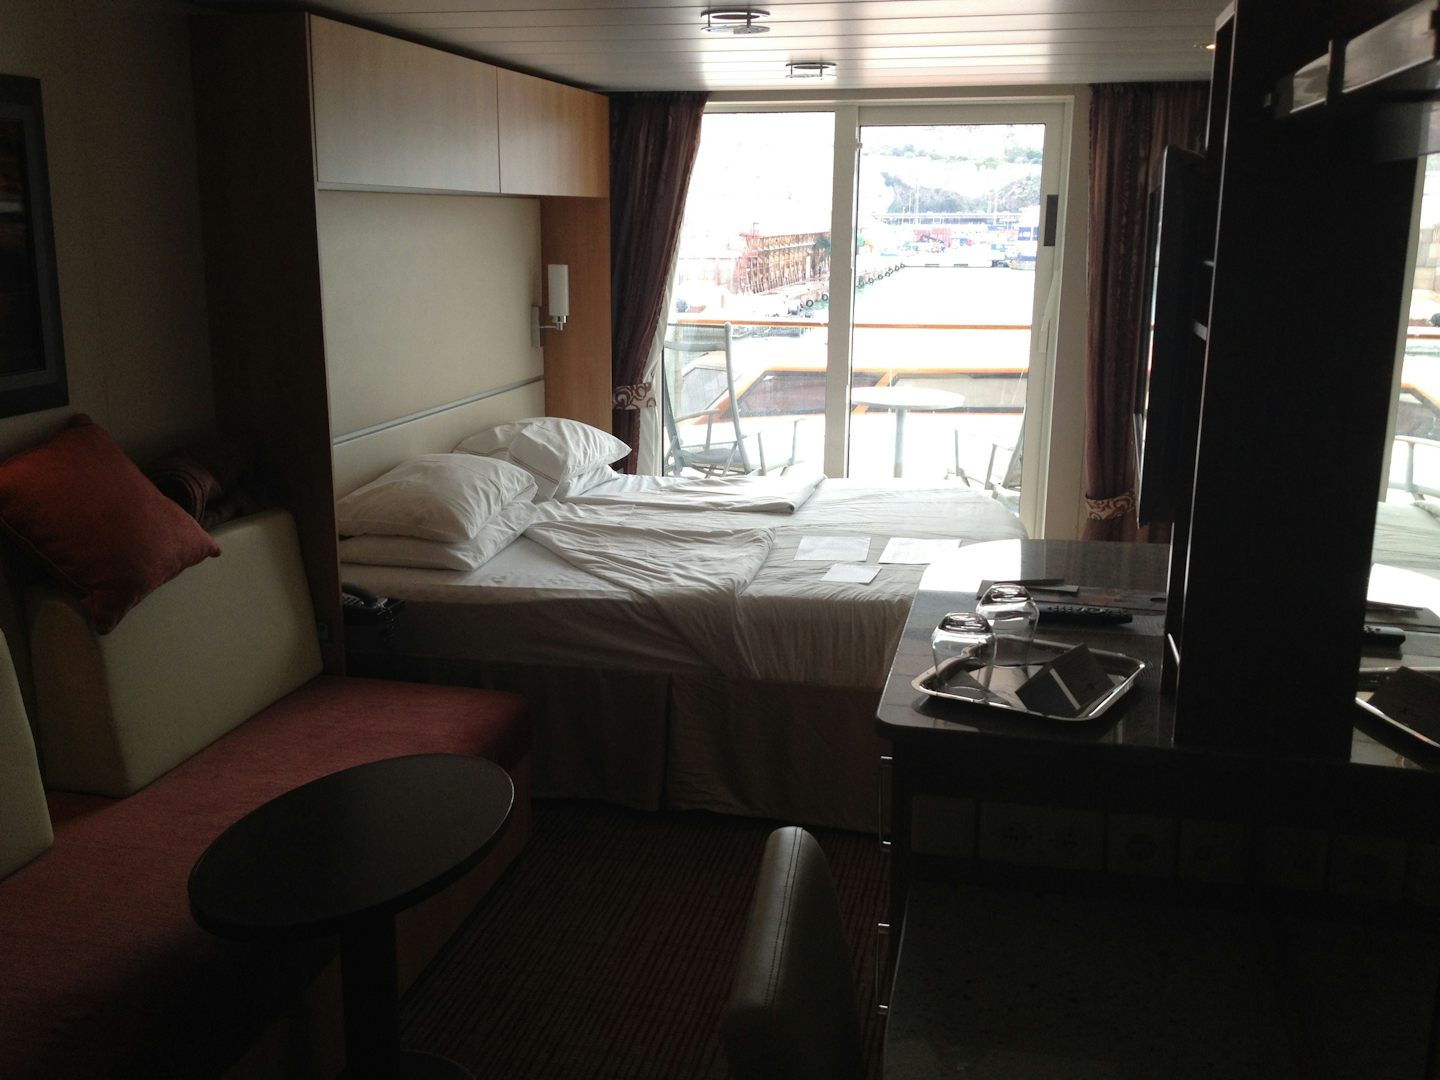 Our cabin looking out (starboard side)